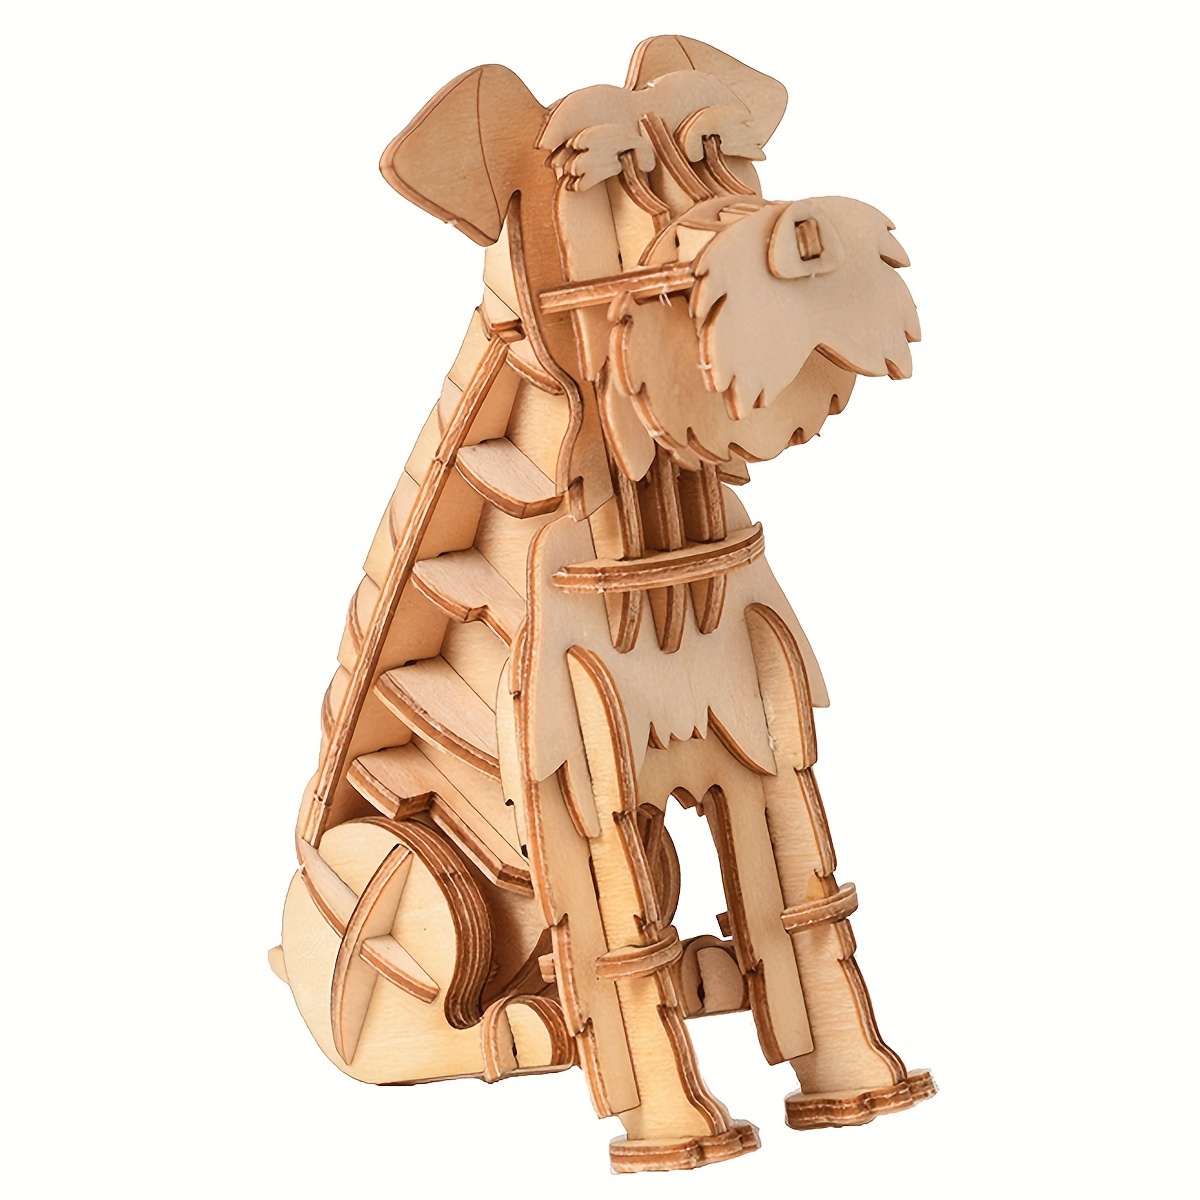 

3d Wooden Puzzle Cute Dog Model Toy, Challenge Game, Learning Educational Puzzle Toy